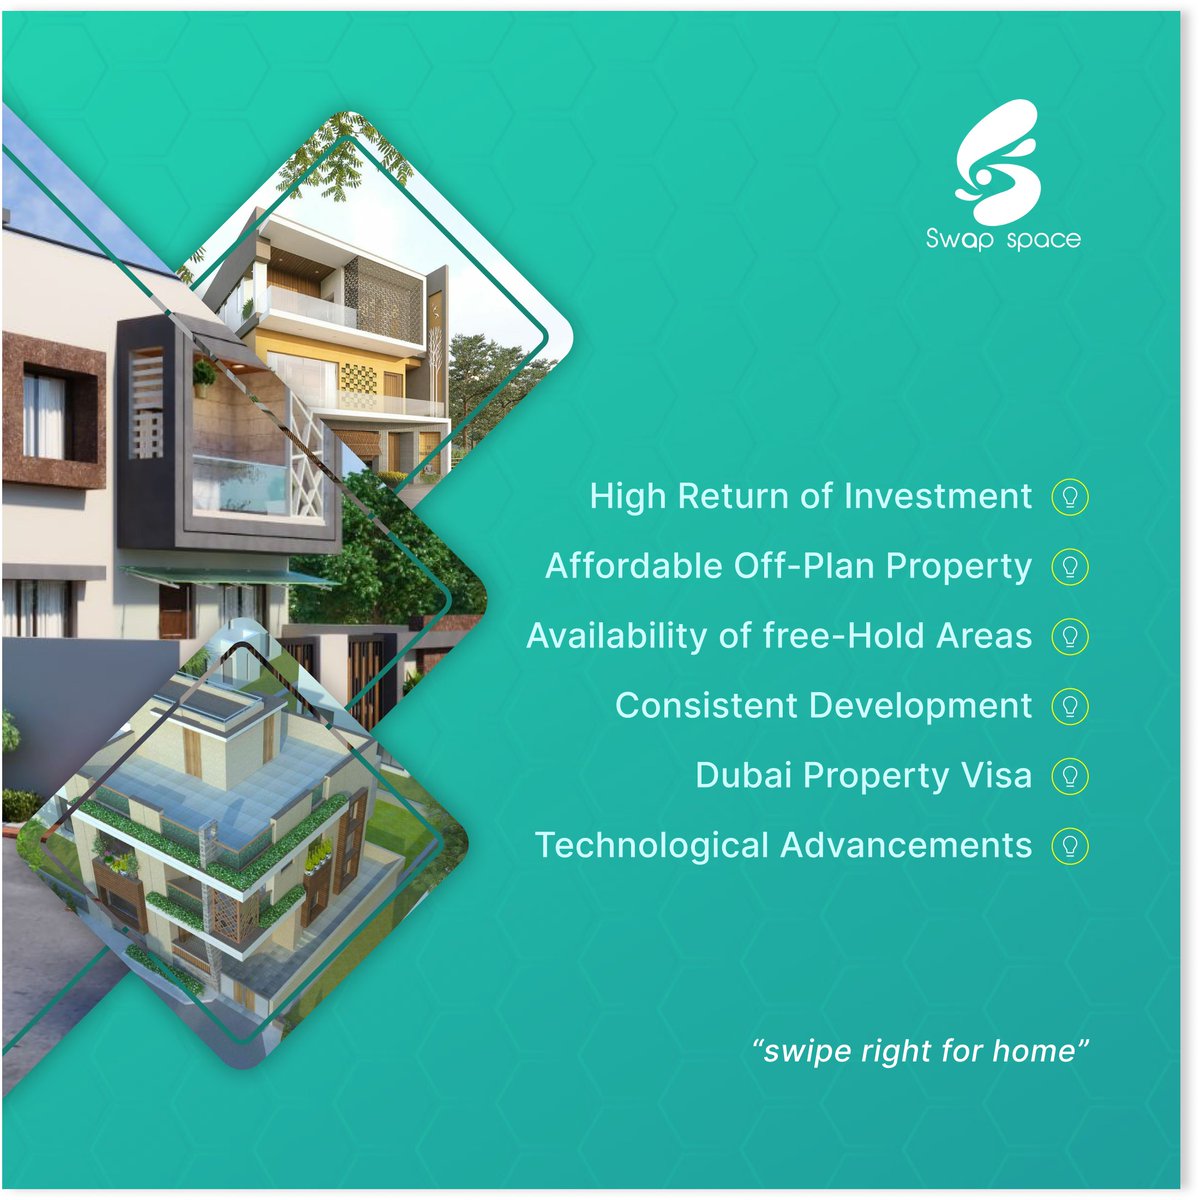 Planning to buy property in Dubai? 🌆Here are some of the benefits of buying property in Dubai:😀
#buyingahome #homeandliving #home #homebuyingtips #homebuying #homeinspection #homesellers #real_estate #preapproved #smart_homes #dubaiproperties #dubaiinvestors
#dubaiproperties